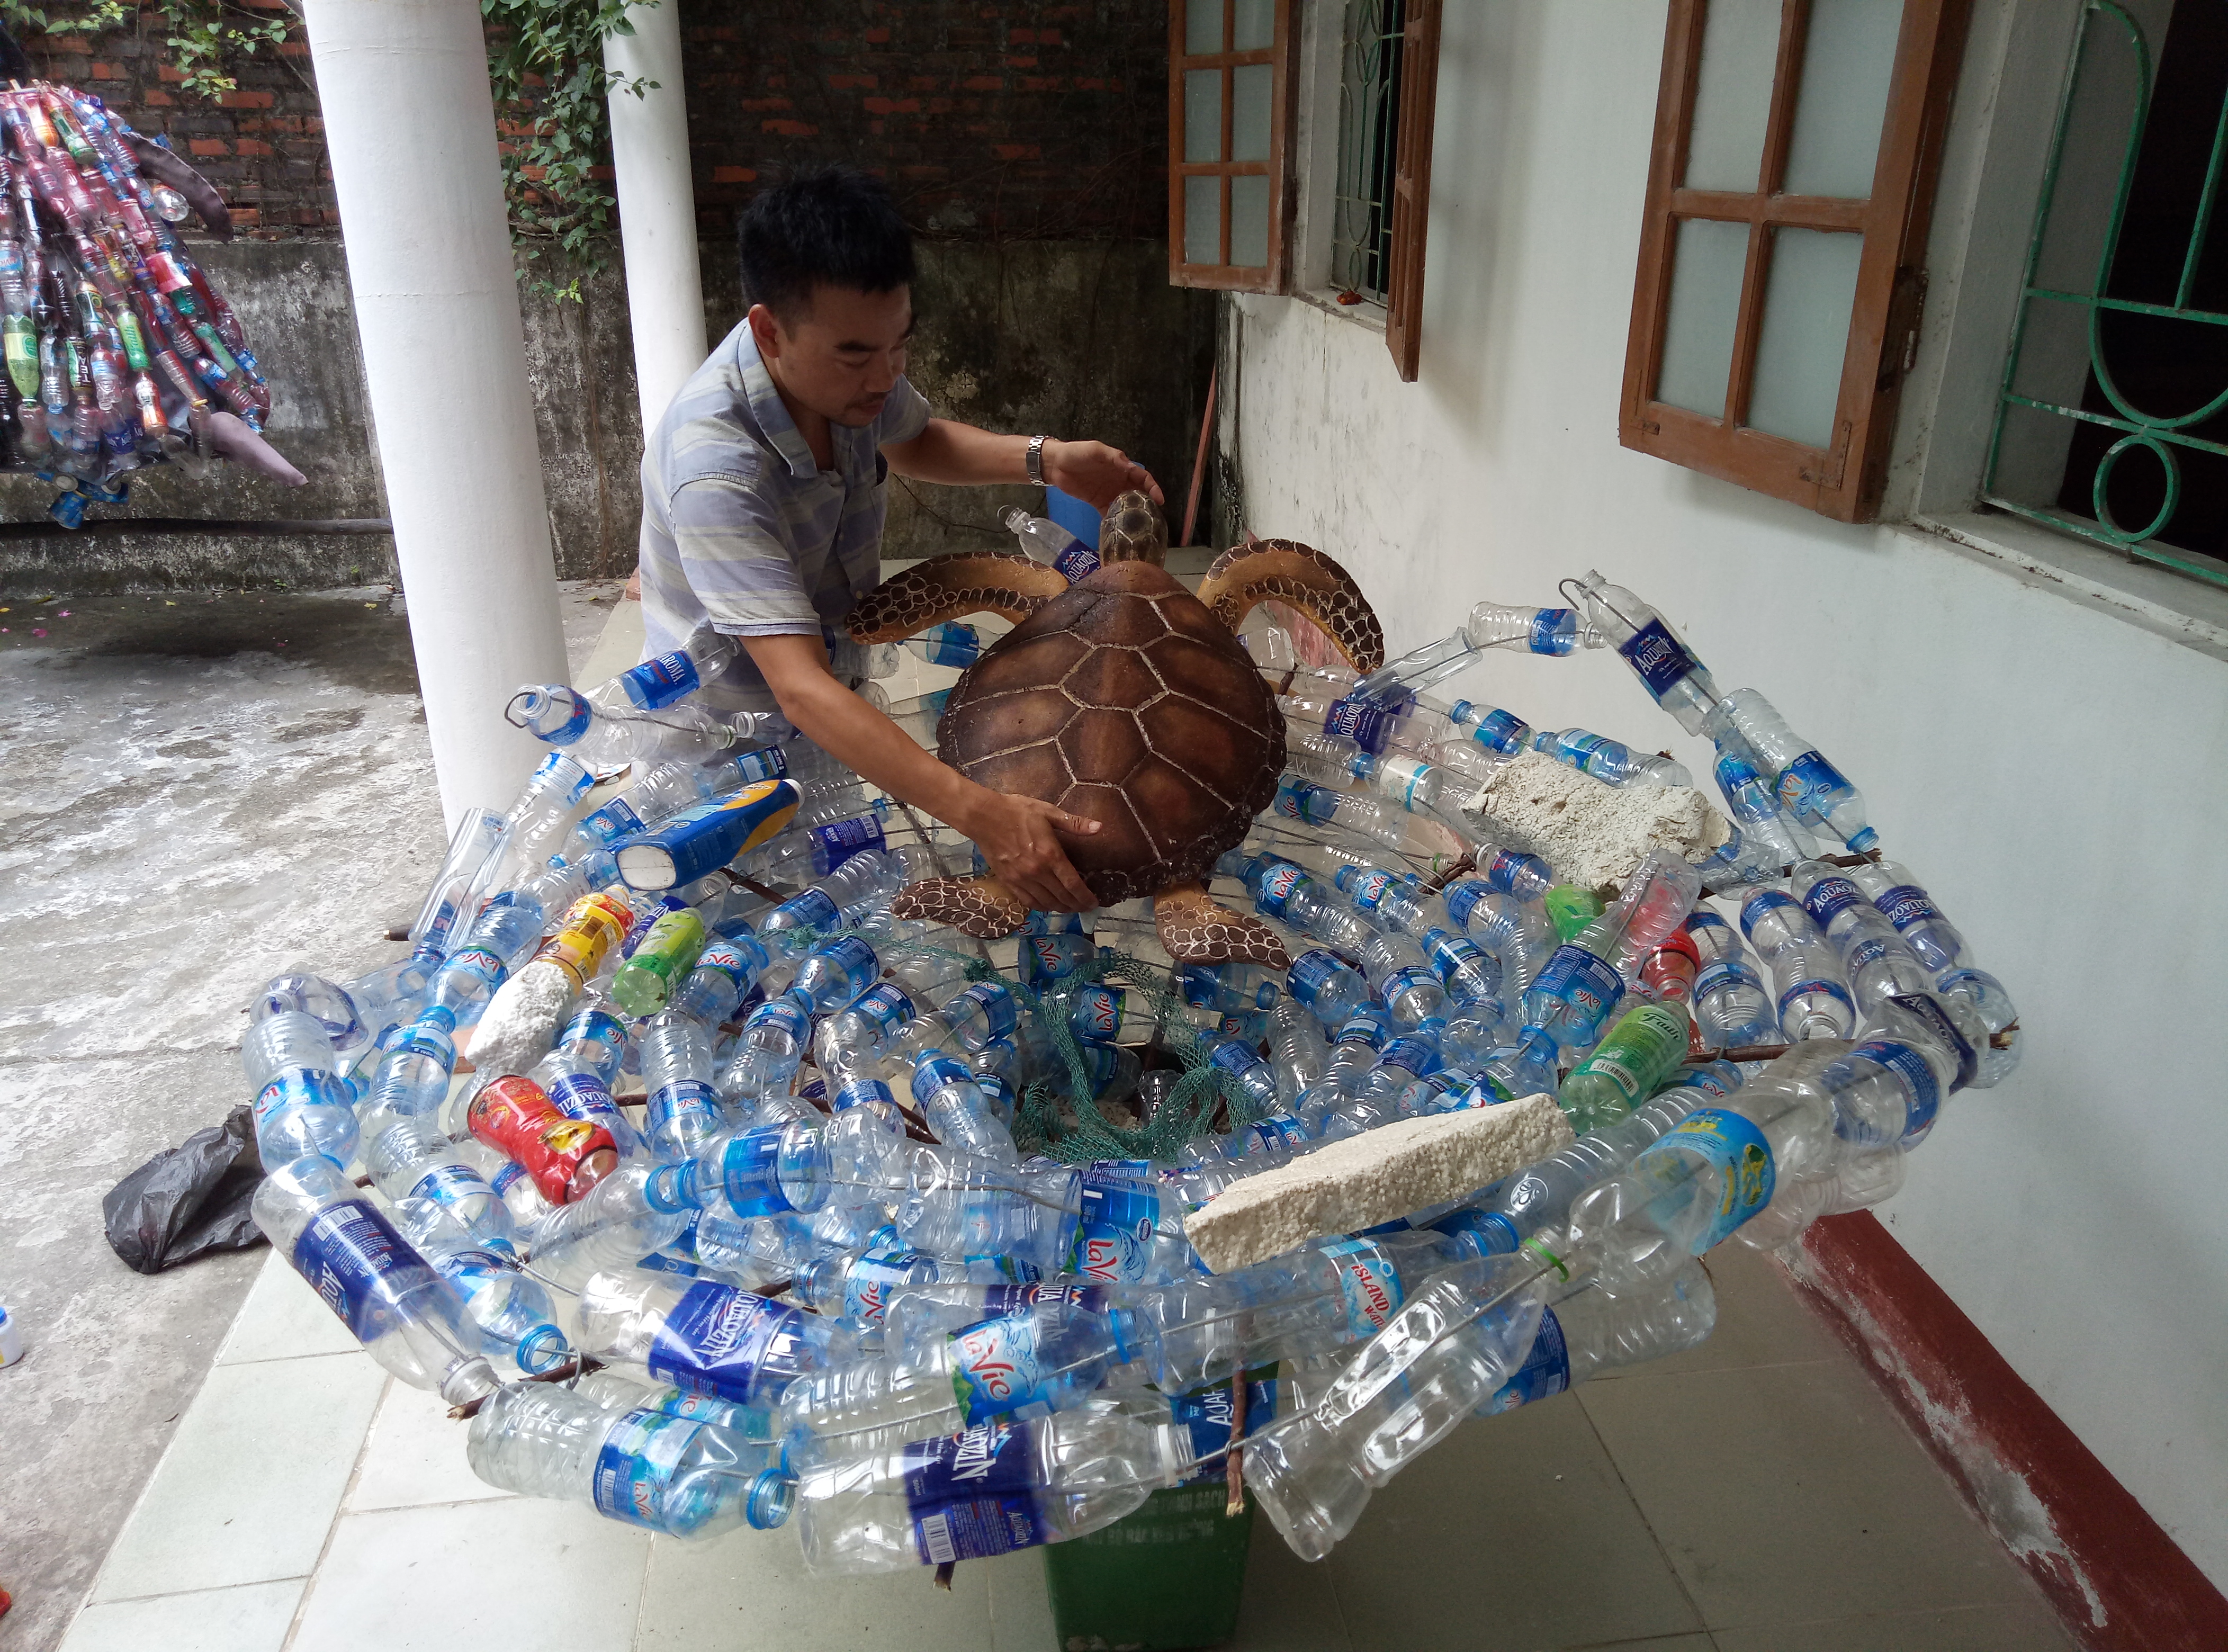 “Help” shows a sea turtle stuck in a cyclone of plastic bottles by Dau Quyet Tien made from foam and plastic bottles 